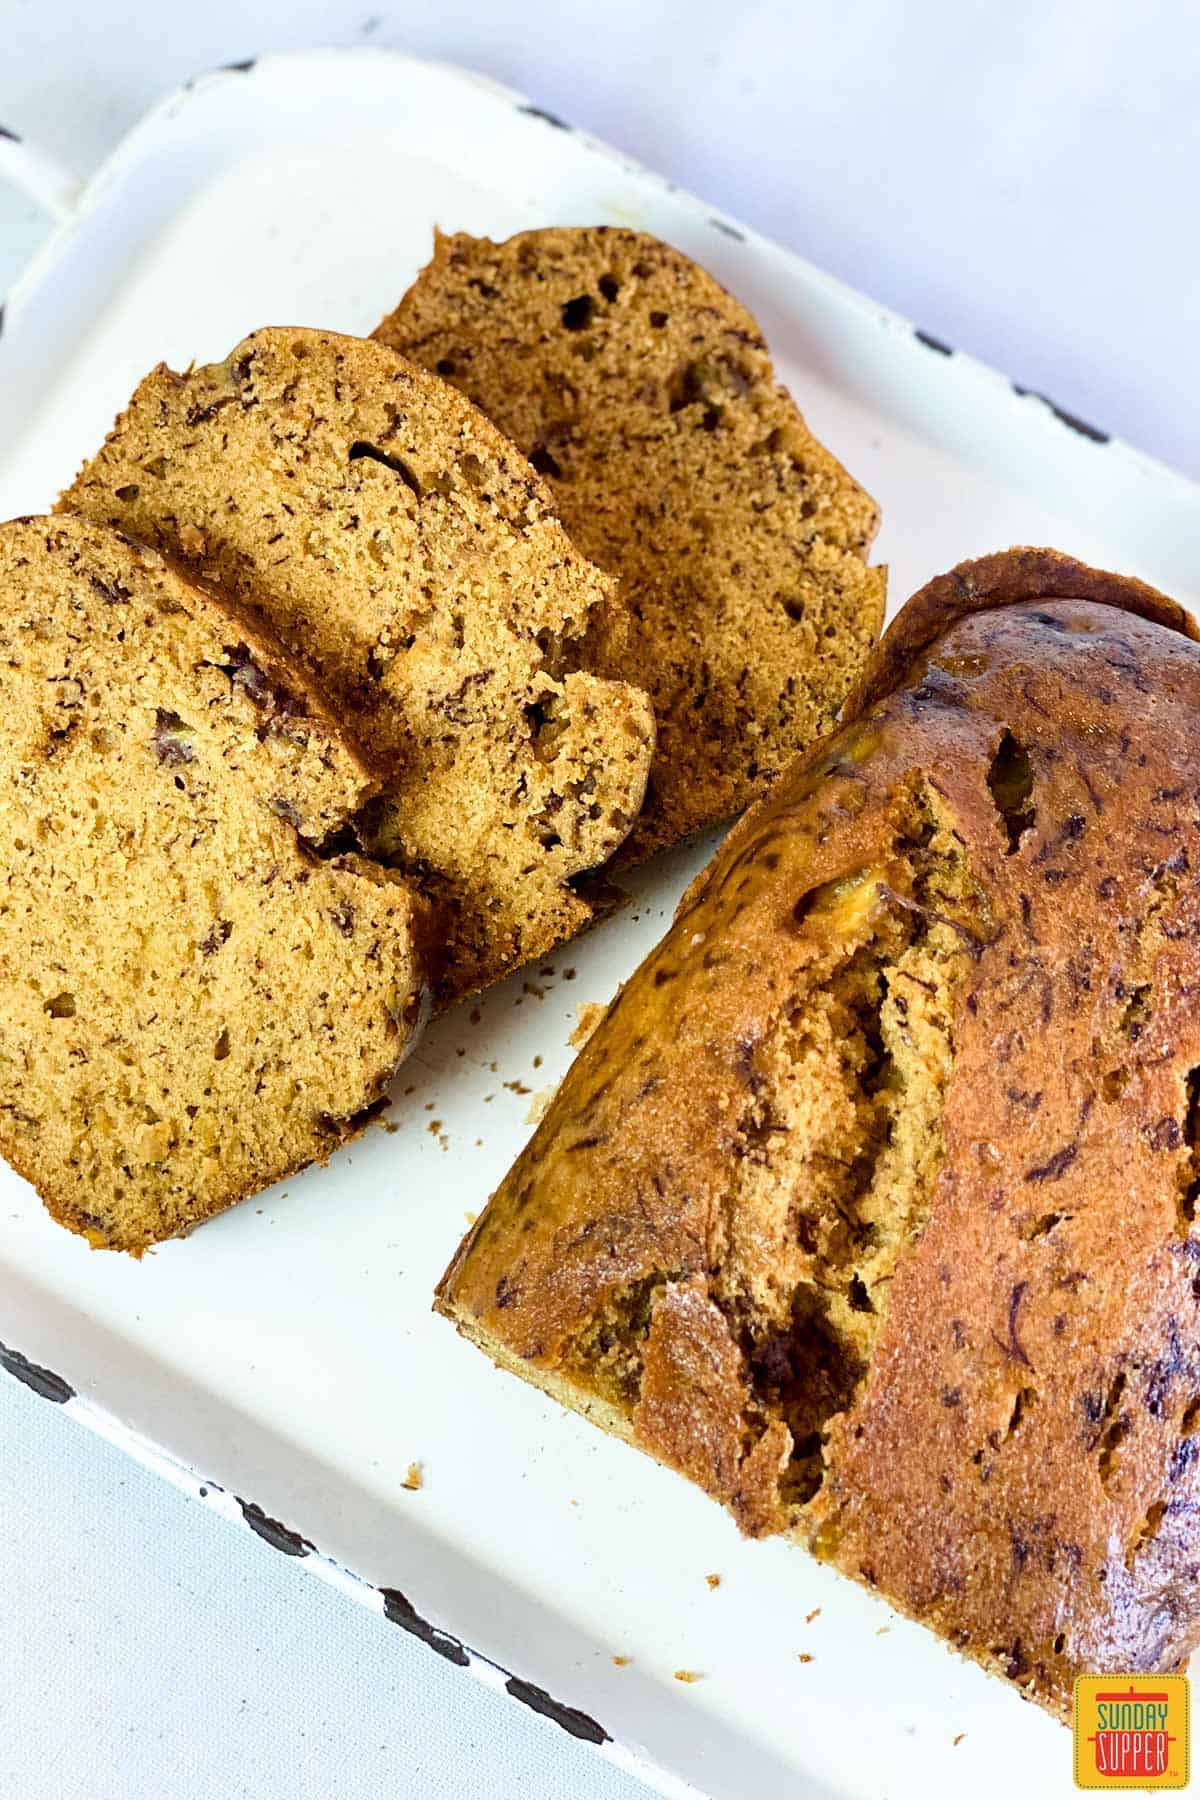 Three slices of banana bread and a loaf of Instant Pot Banana bread on a white platter